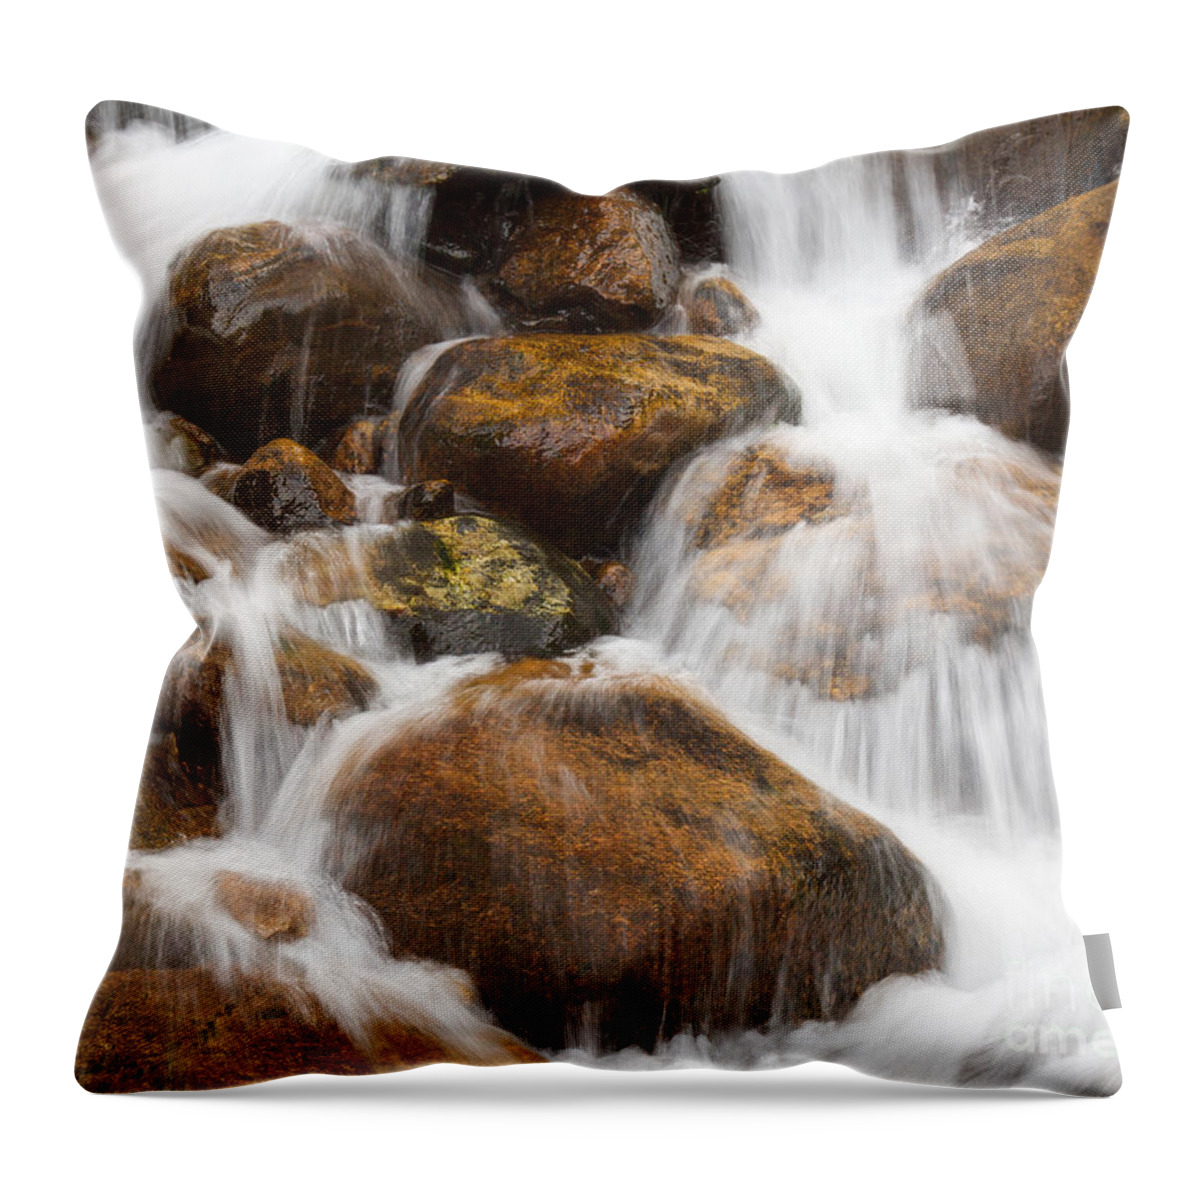 Waterfall Throw Pillow featuring the photograph Serenity Central by Chris Scroggins